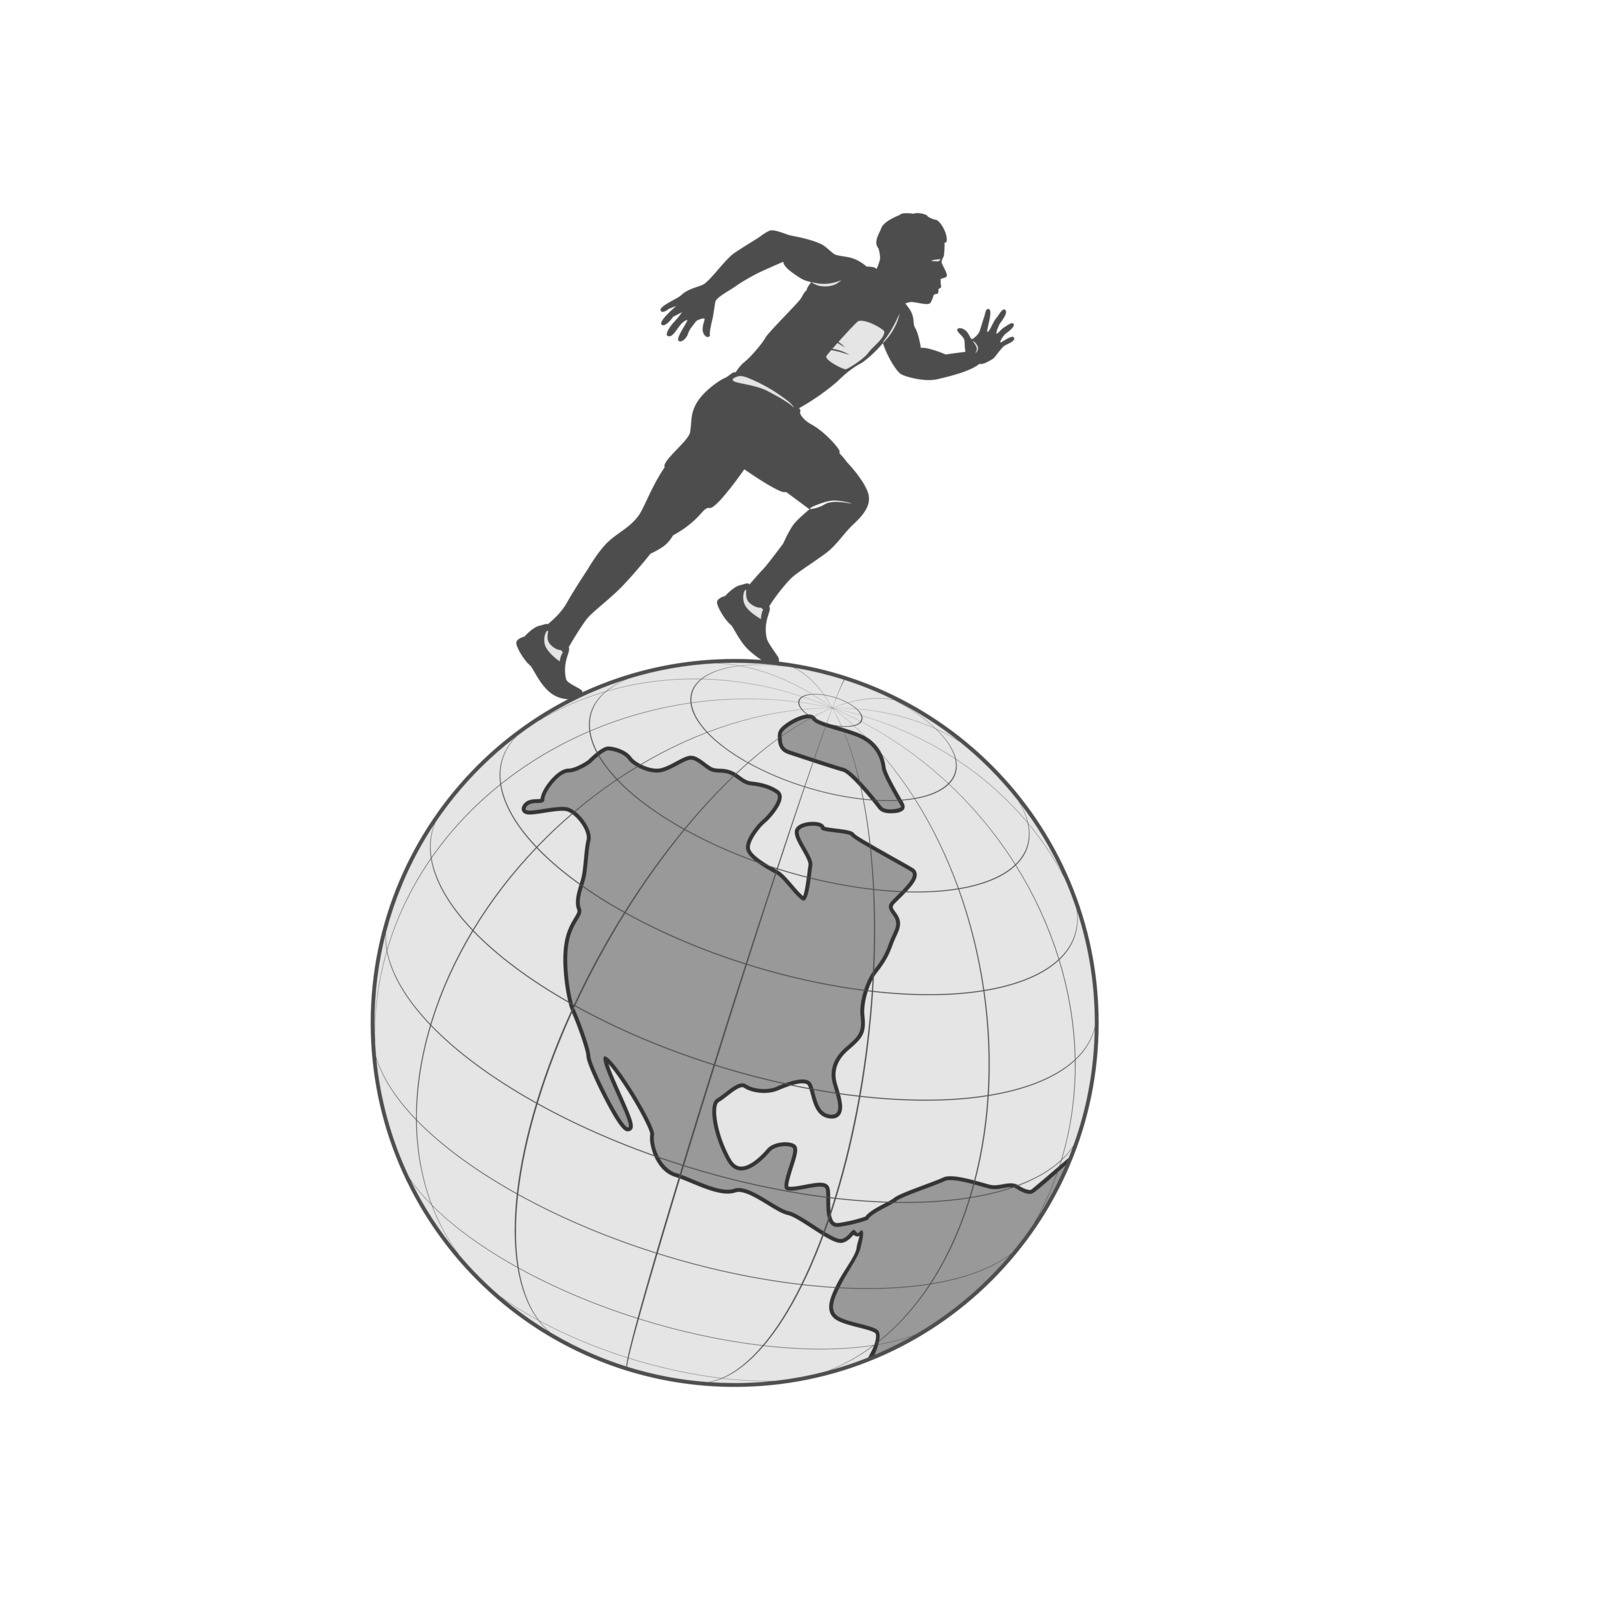 the male sprinter runs quickly over the surface of the globe. isolate on white background.